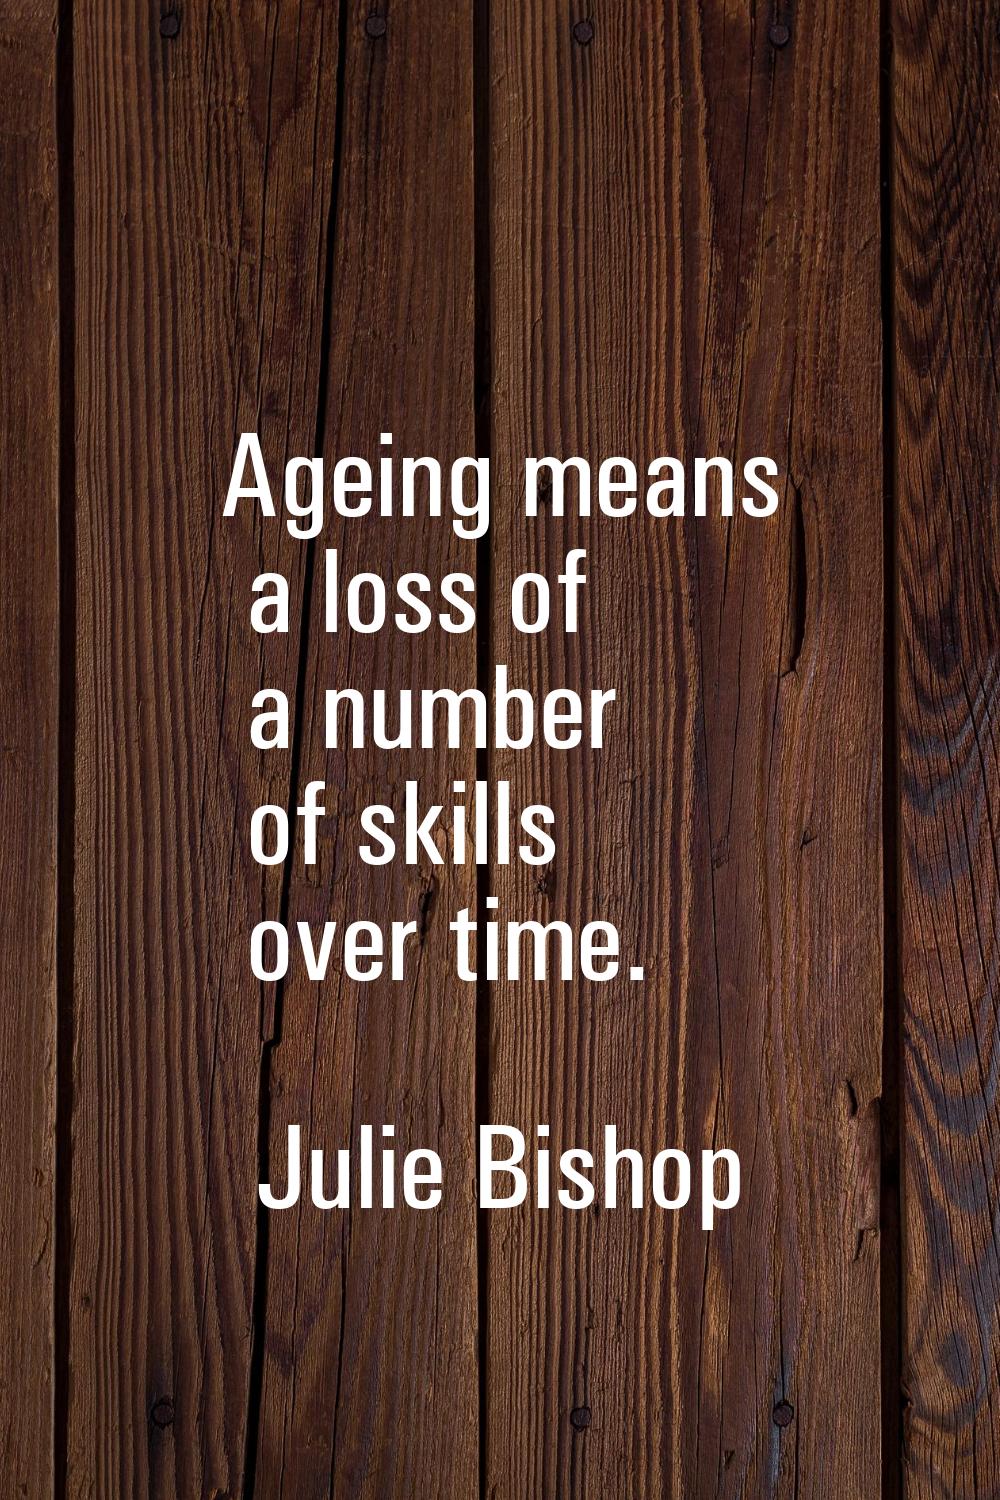 Ageing means a loss of a number of skills over time.